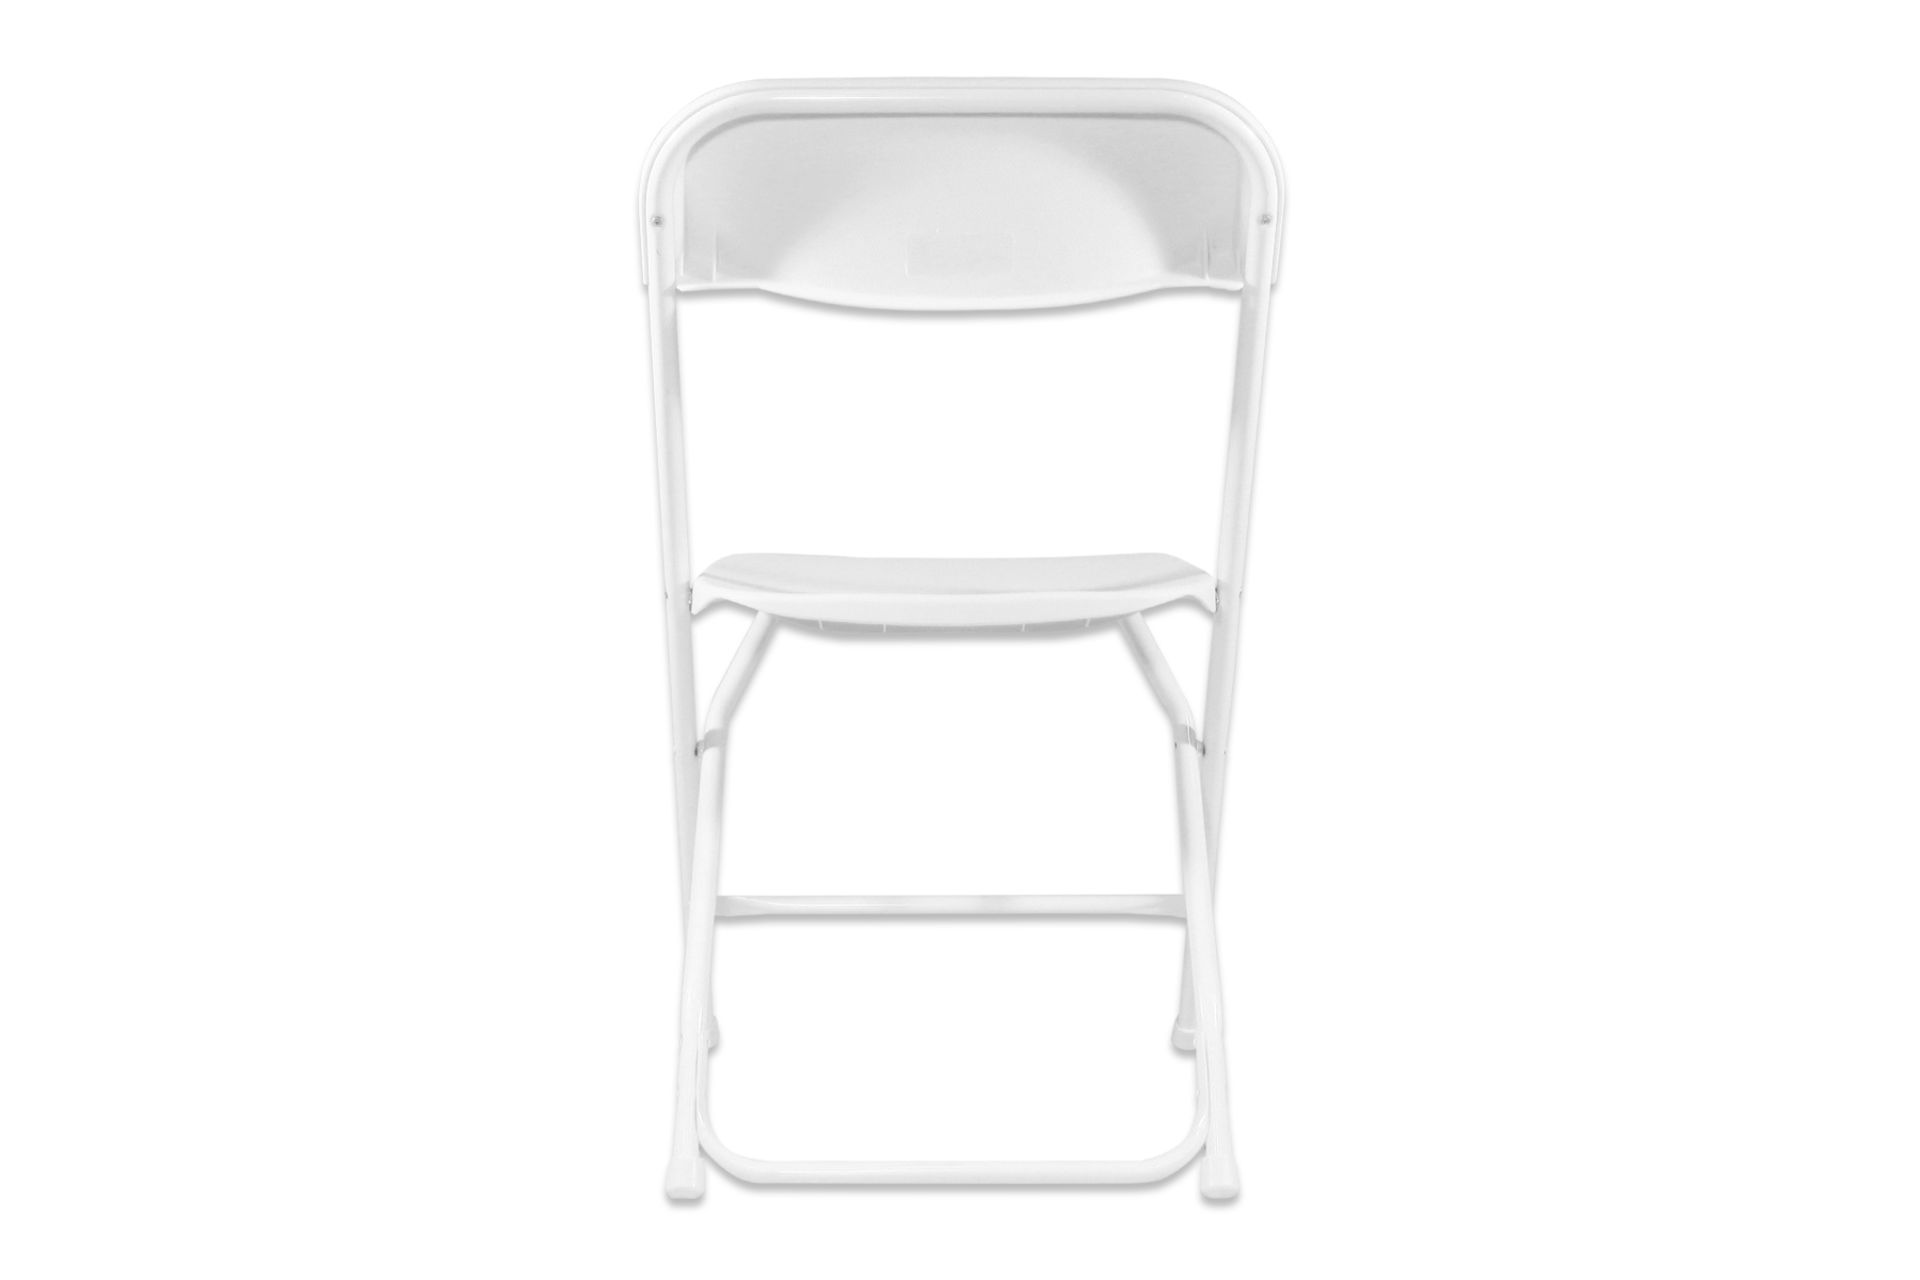 V *TRADE QTY* Grade A Folding Plastic Chair - White X180 YOUR BID PRICE TO BE MULTIPLIED BY ONE - Image 2 of 6